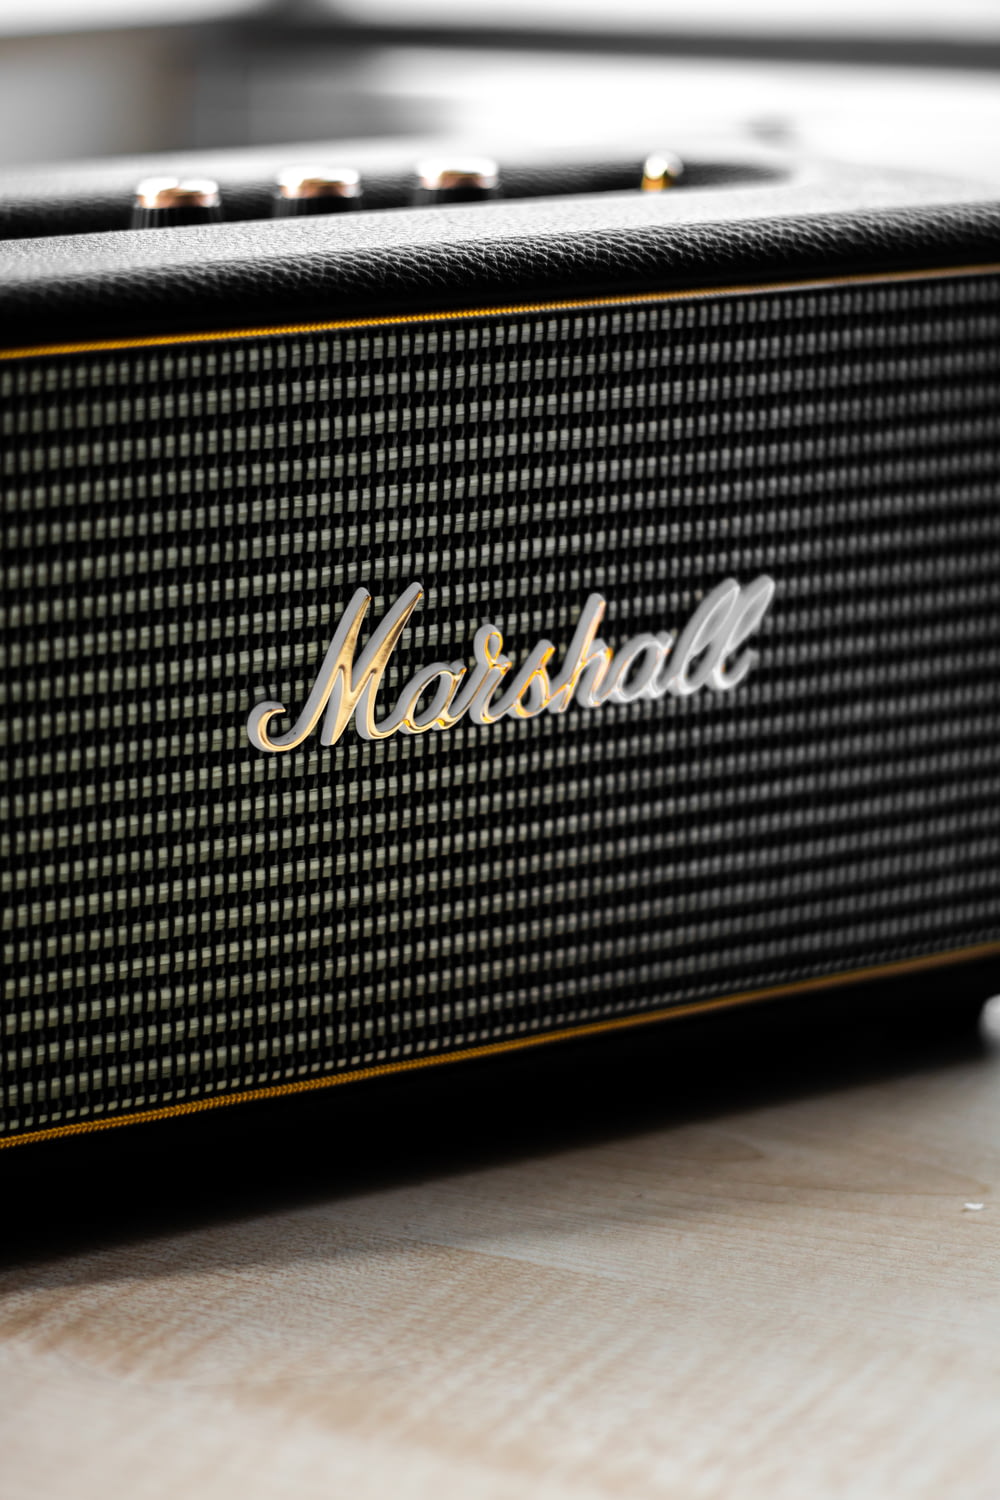 closeup photo of gray and black Marshall guitar amplifier